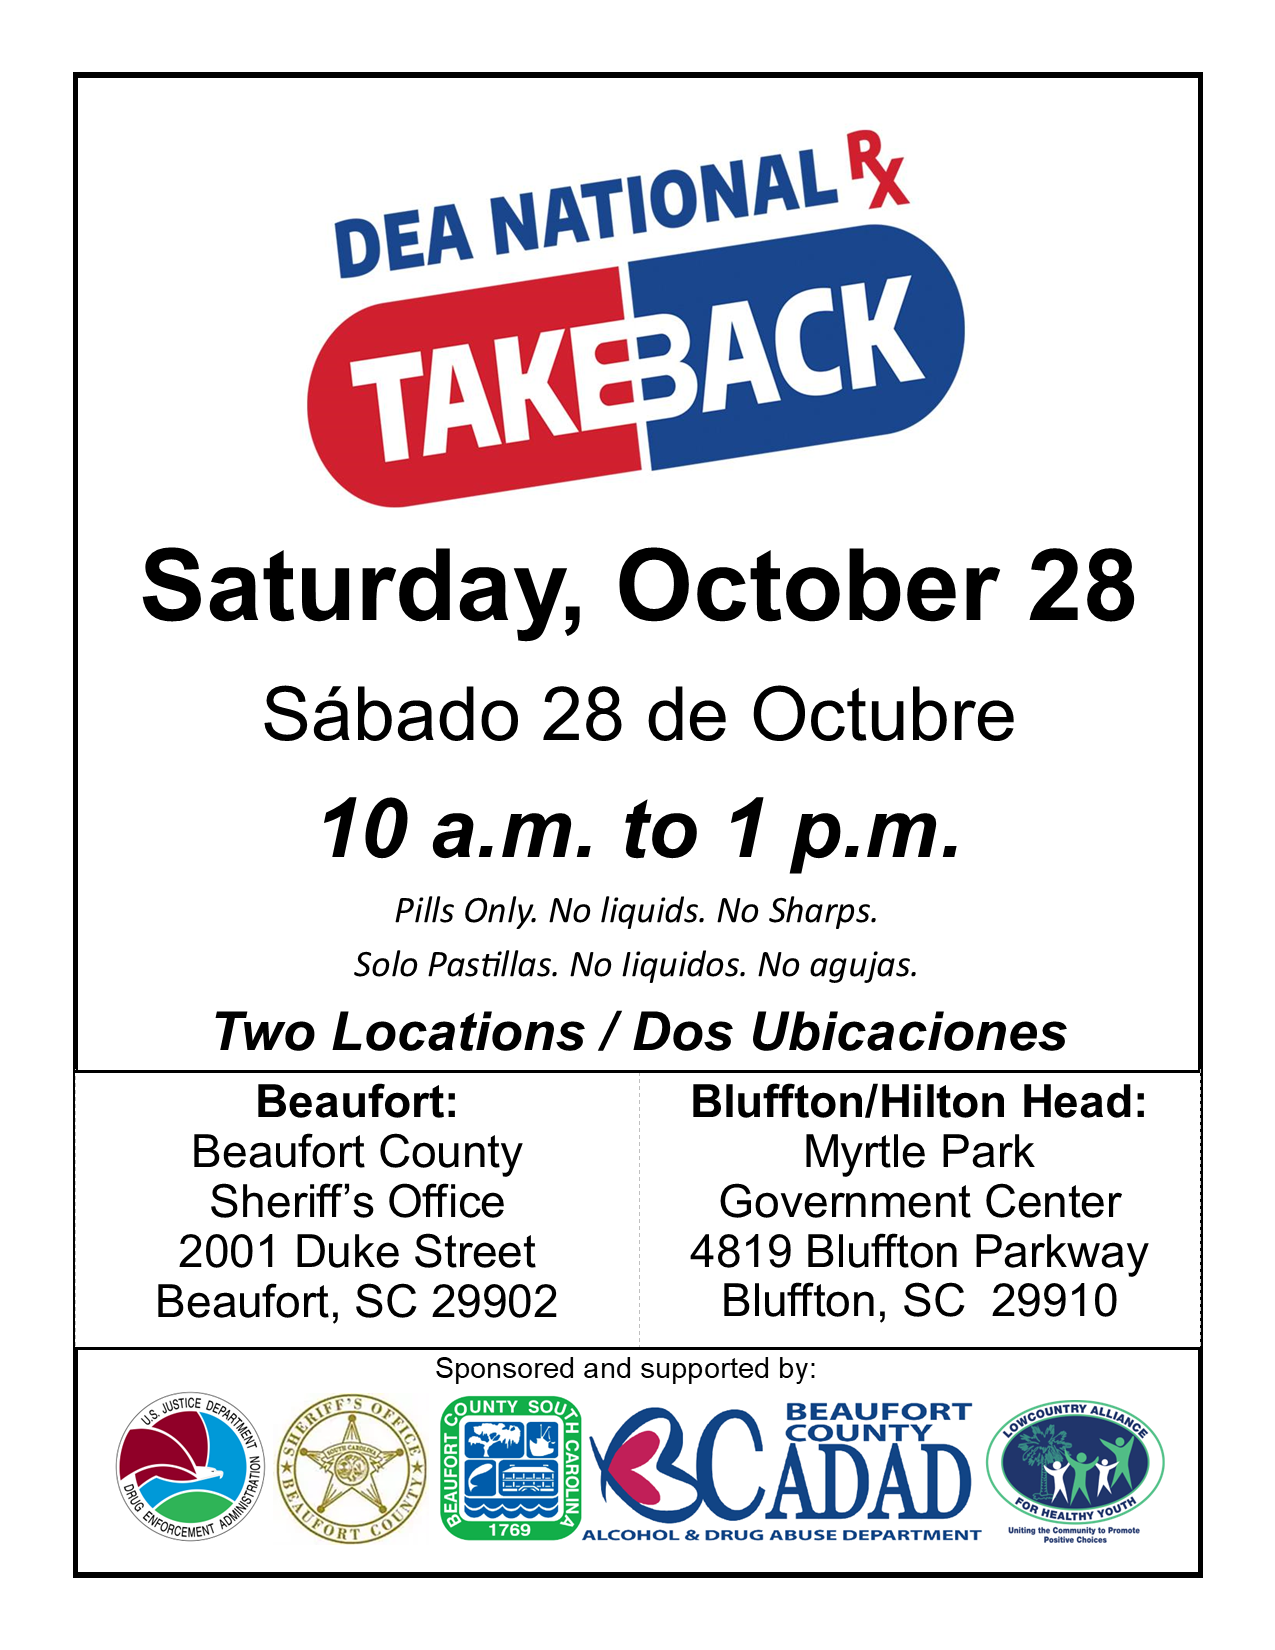 Beaufort County Offers Two Locations for Residents to Properly Dispose  of Prescription Drugs  Saturday, October 28